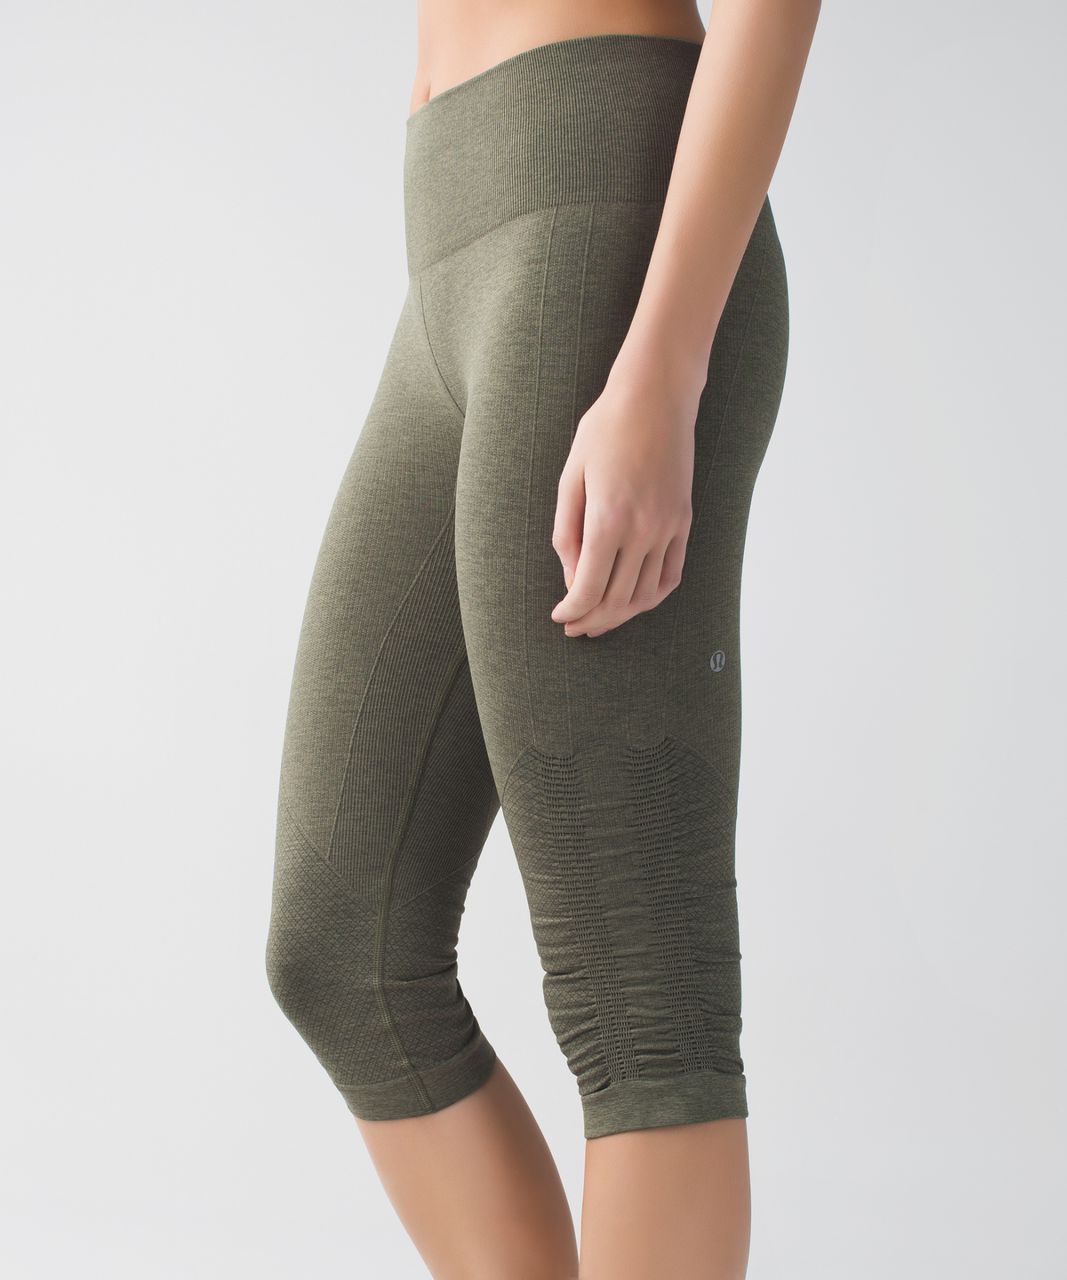 Lululemon In The Flow Crop II (First Release) - Heathered Fatigue Green